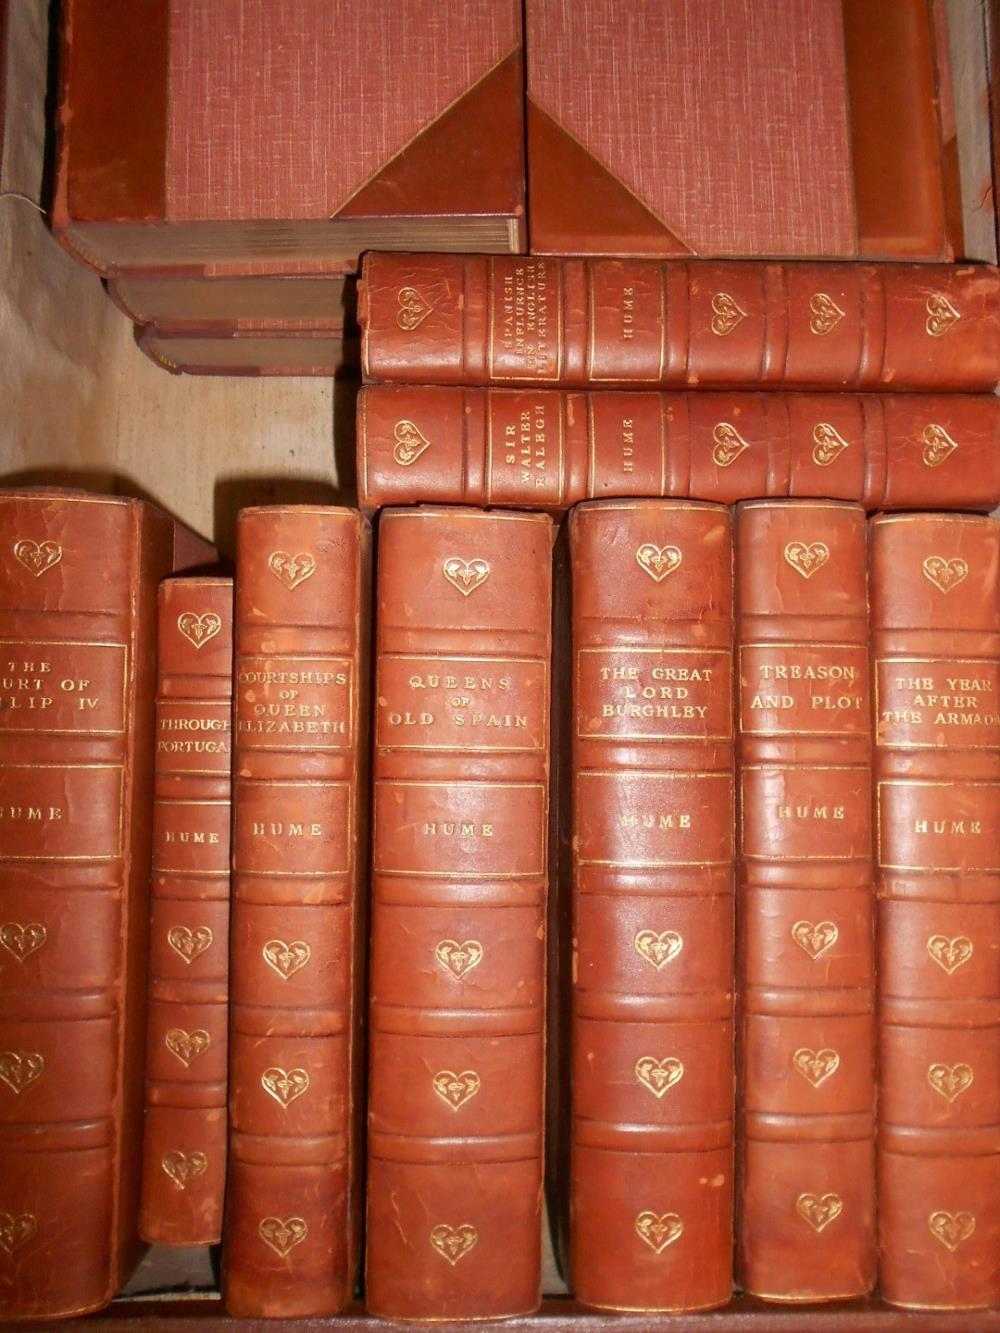 Bindings. Collection of 40 vols, 8vo, circa 1900, classic works and novels, with Institution of - Image 3 of 3